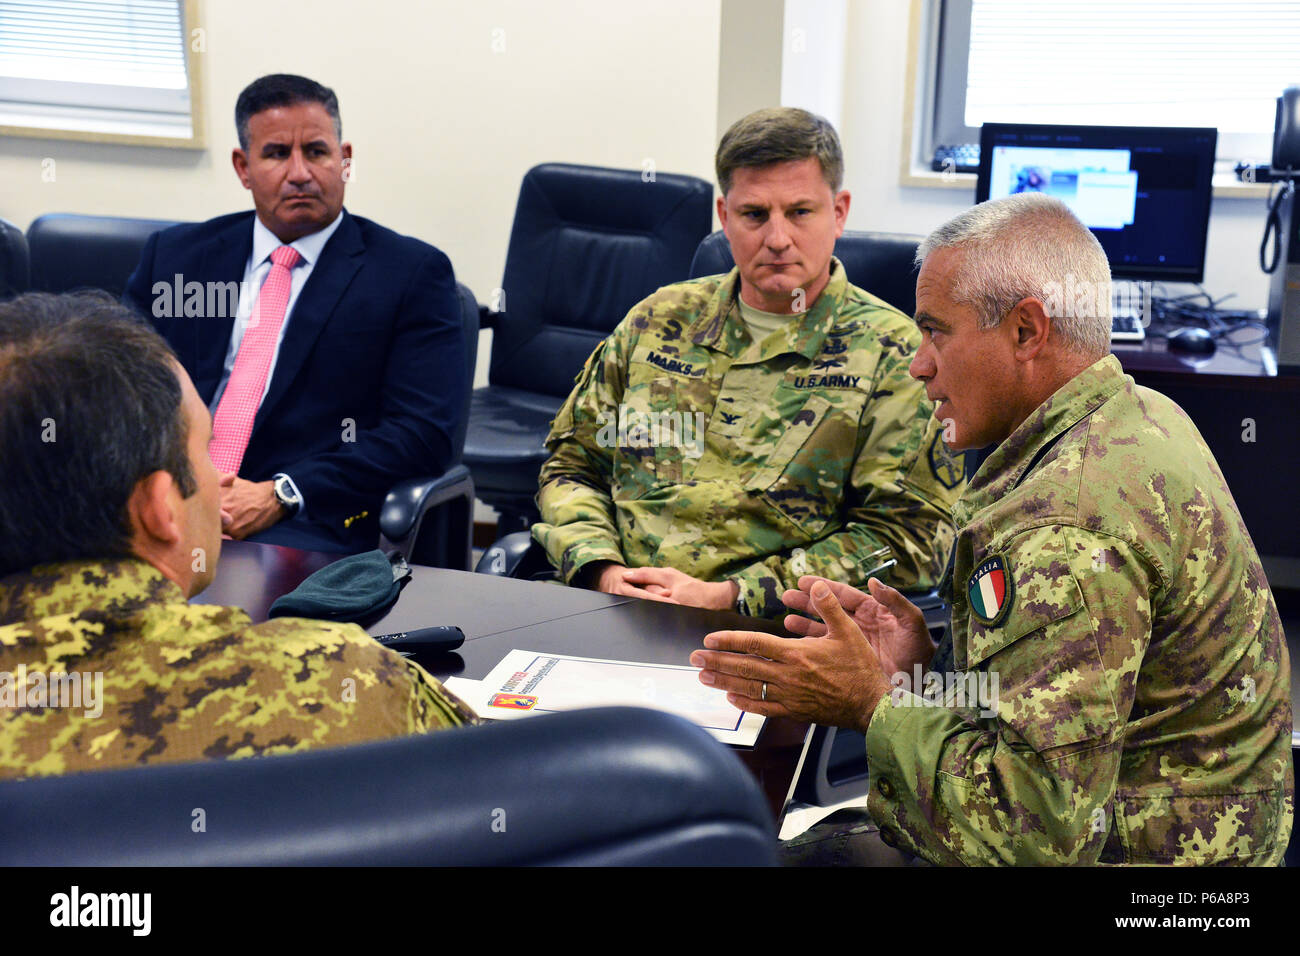 Director Seifert Charles Matthew, Directorate of Plans Training Mobilization and Security “DPTMS” (left), Colonel Steven M. Marks, commander United States Army Garrison Italy (center), Italian Army Colonel Federico Pognant Airassa, Public Information Officer Command of land forces operational “COMFOTER” (right), during the meeting media strategies in Caserma Ederle, Vicenza, Italy, May 31, 2016. Italian Army visit U.S. Army, in order to enhance to bilateral relations and to expand levels of cooperation and the capacity of the personnel involved in joint operations. (Photo by Visual Information Stock Photo